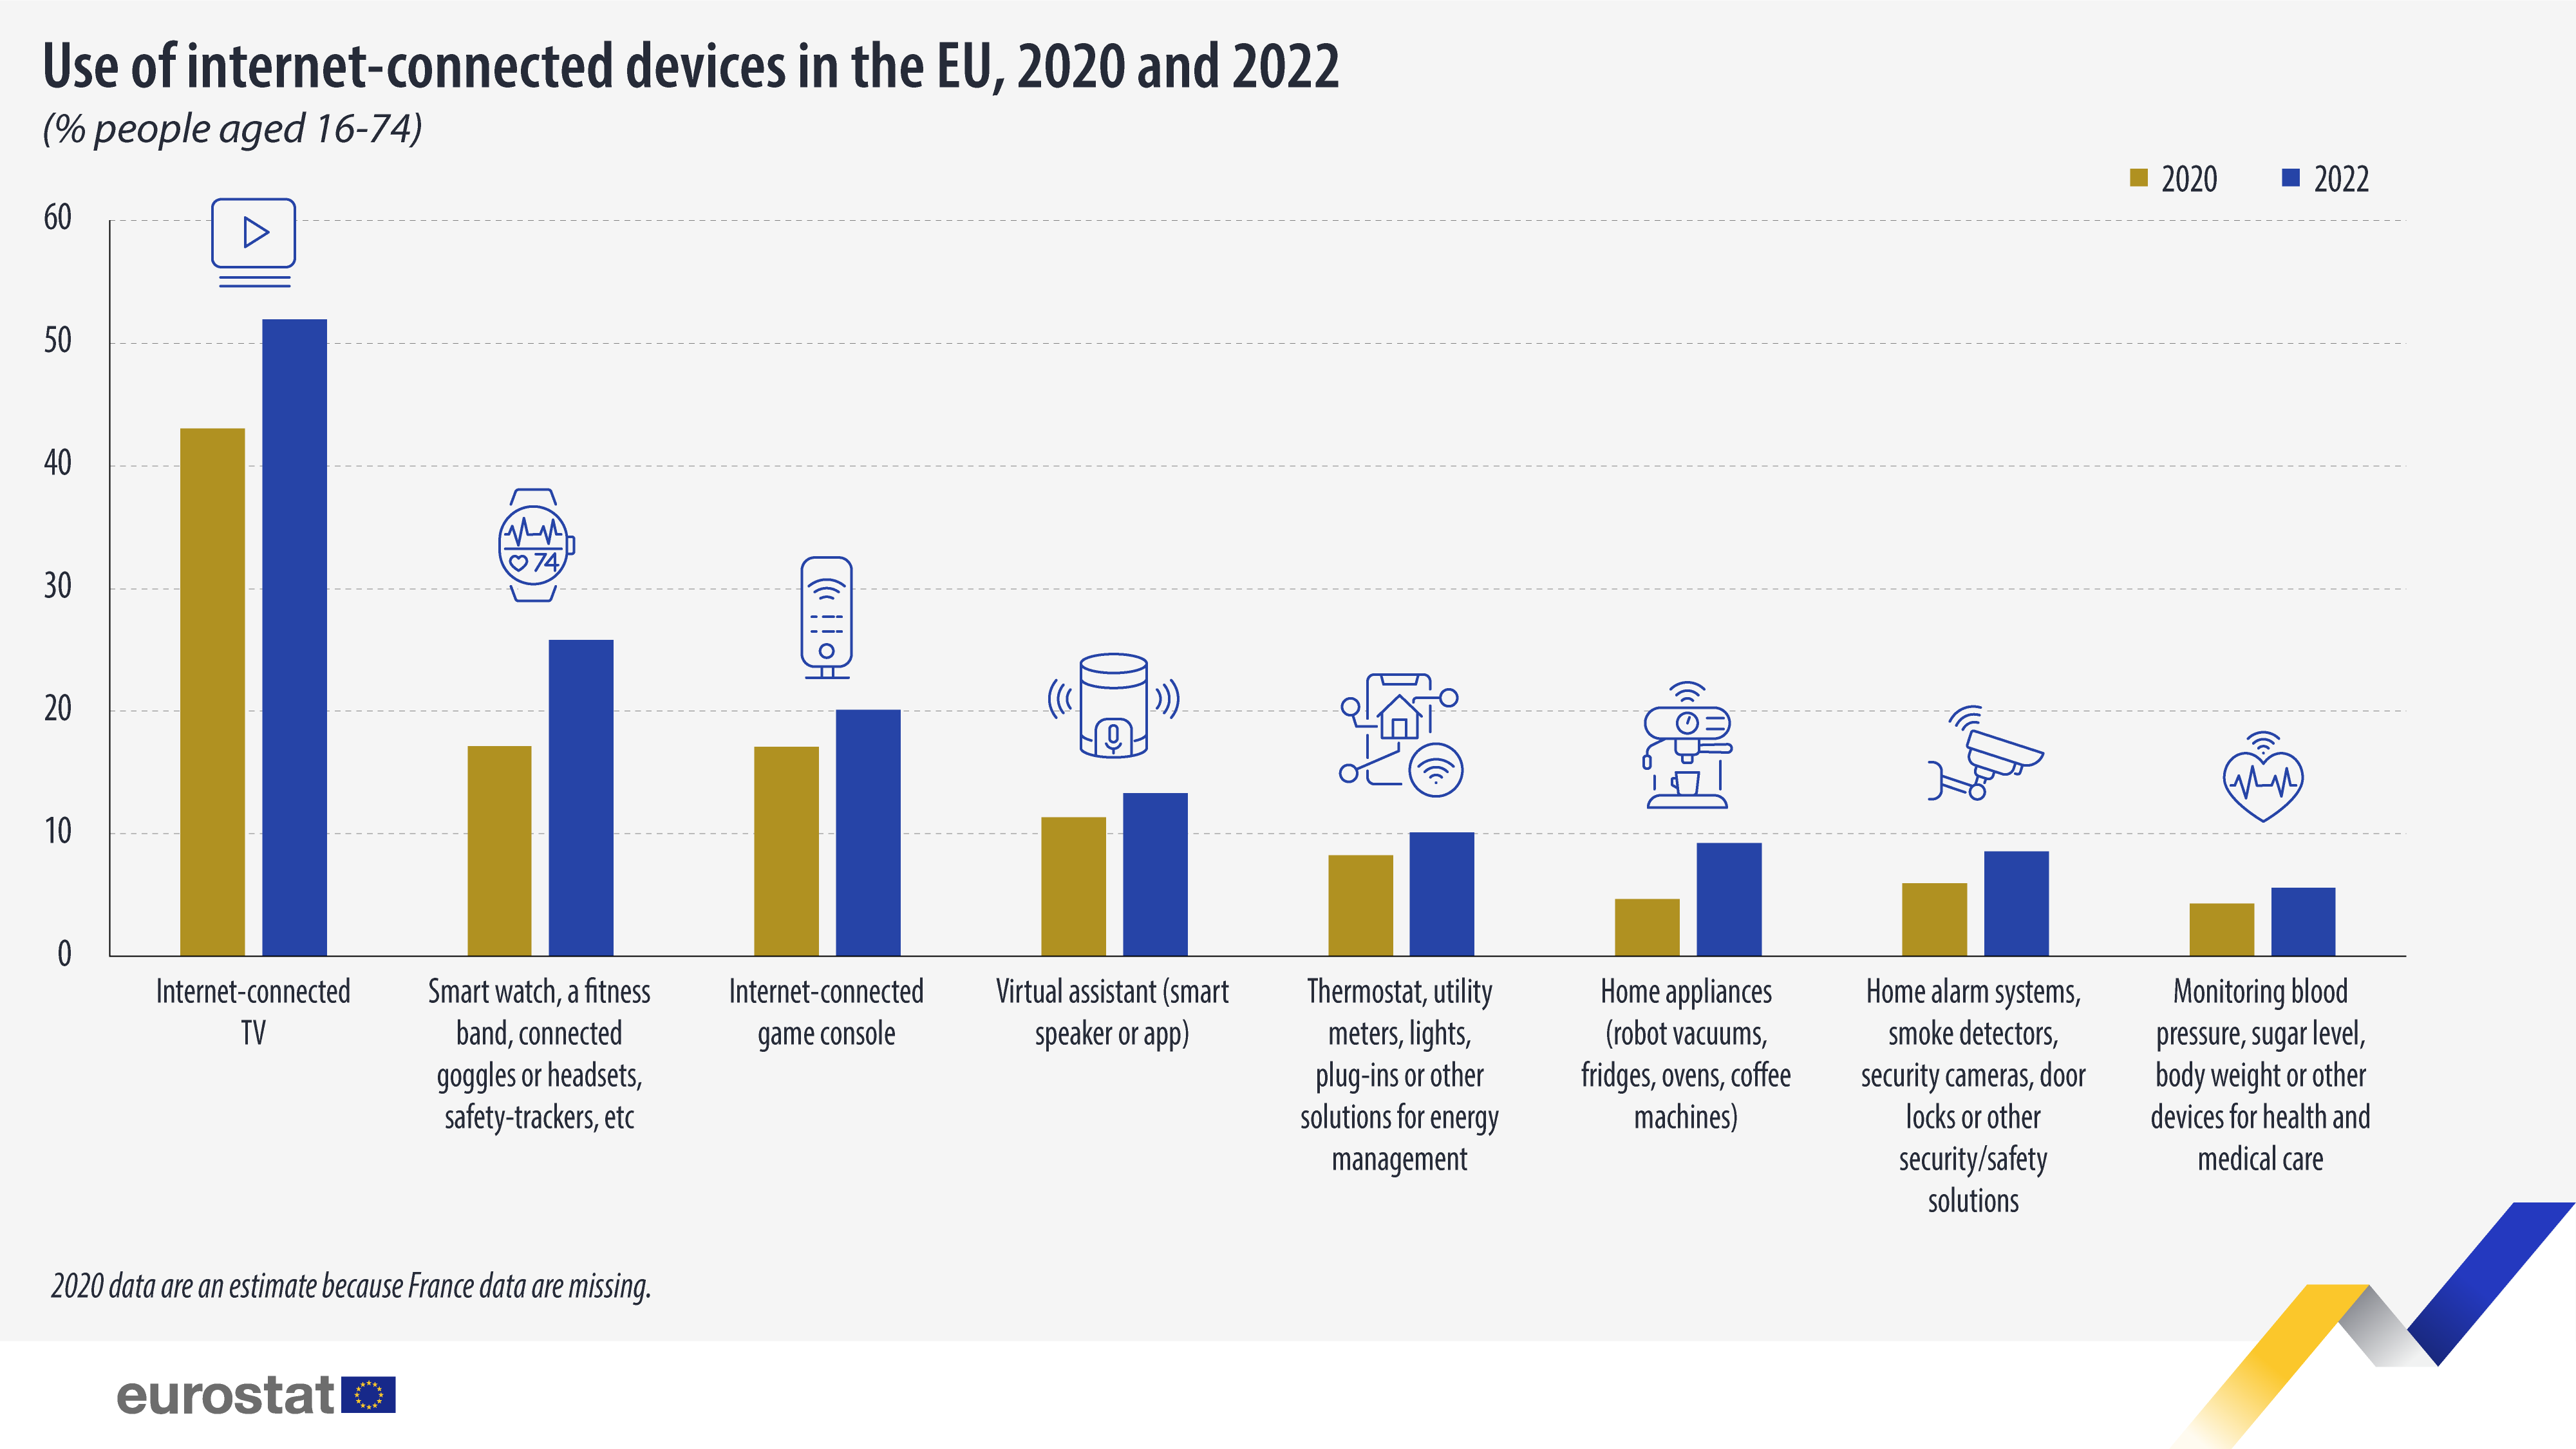 Bar chart: Use of intrnet-connected devices in the EU, % of people aged 16-74, 2020 and 2022